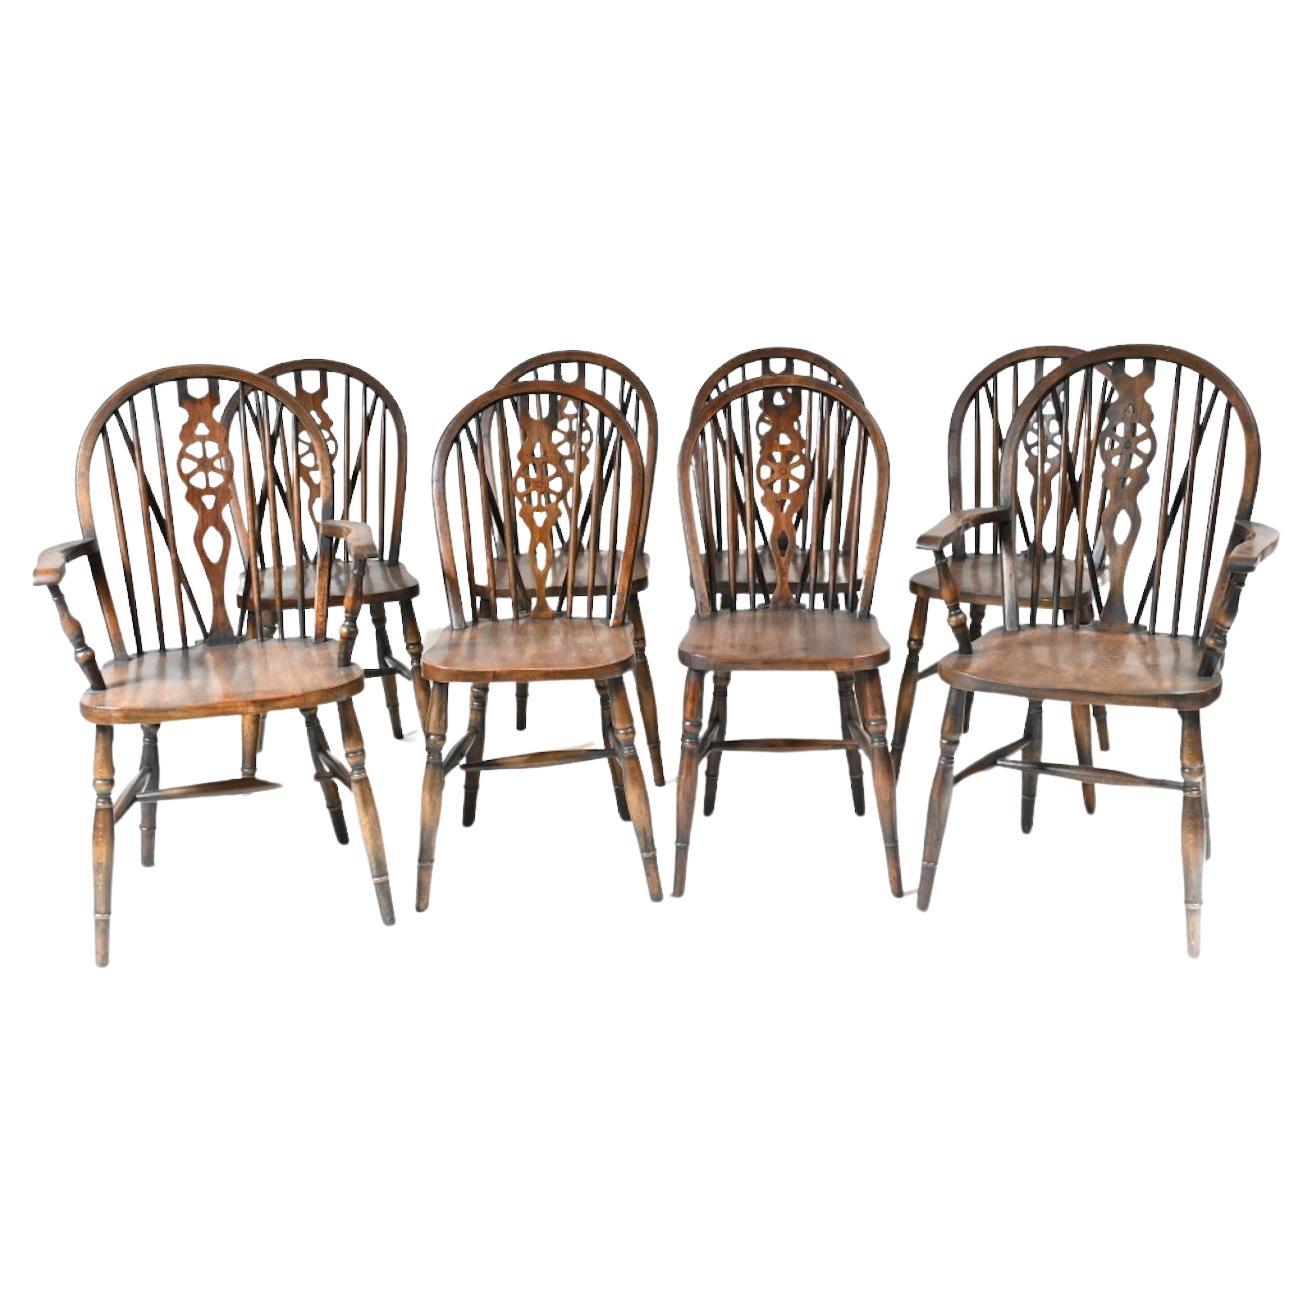 Set 8 Antique Windsor Chairs Wheelback Kitchen Diners 1890 For Sale